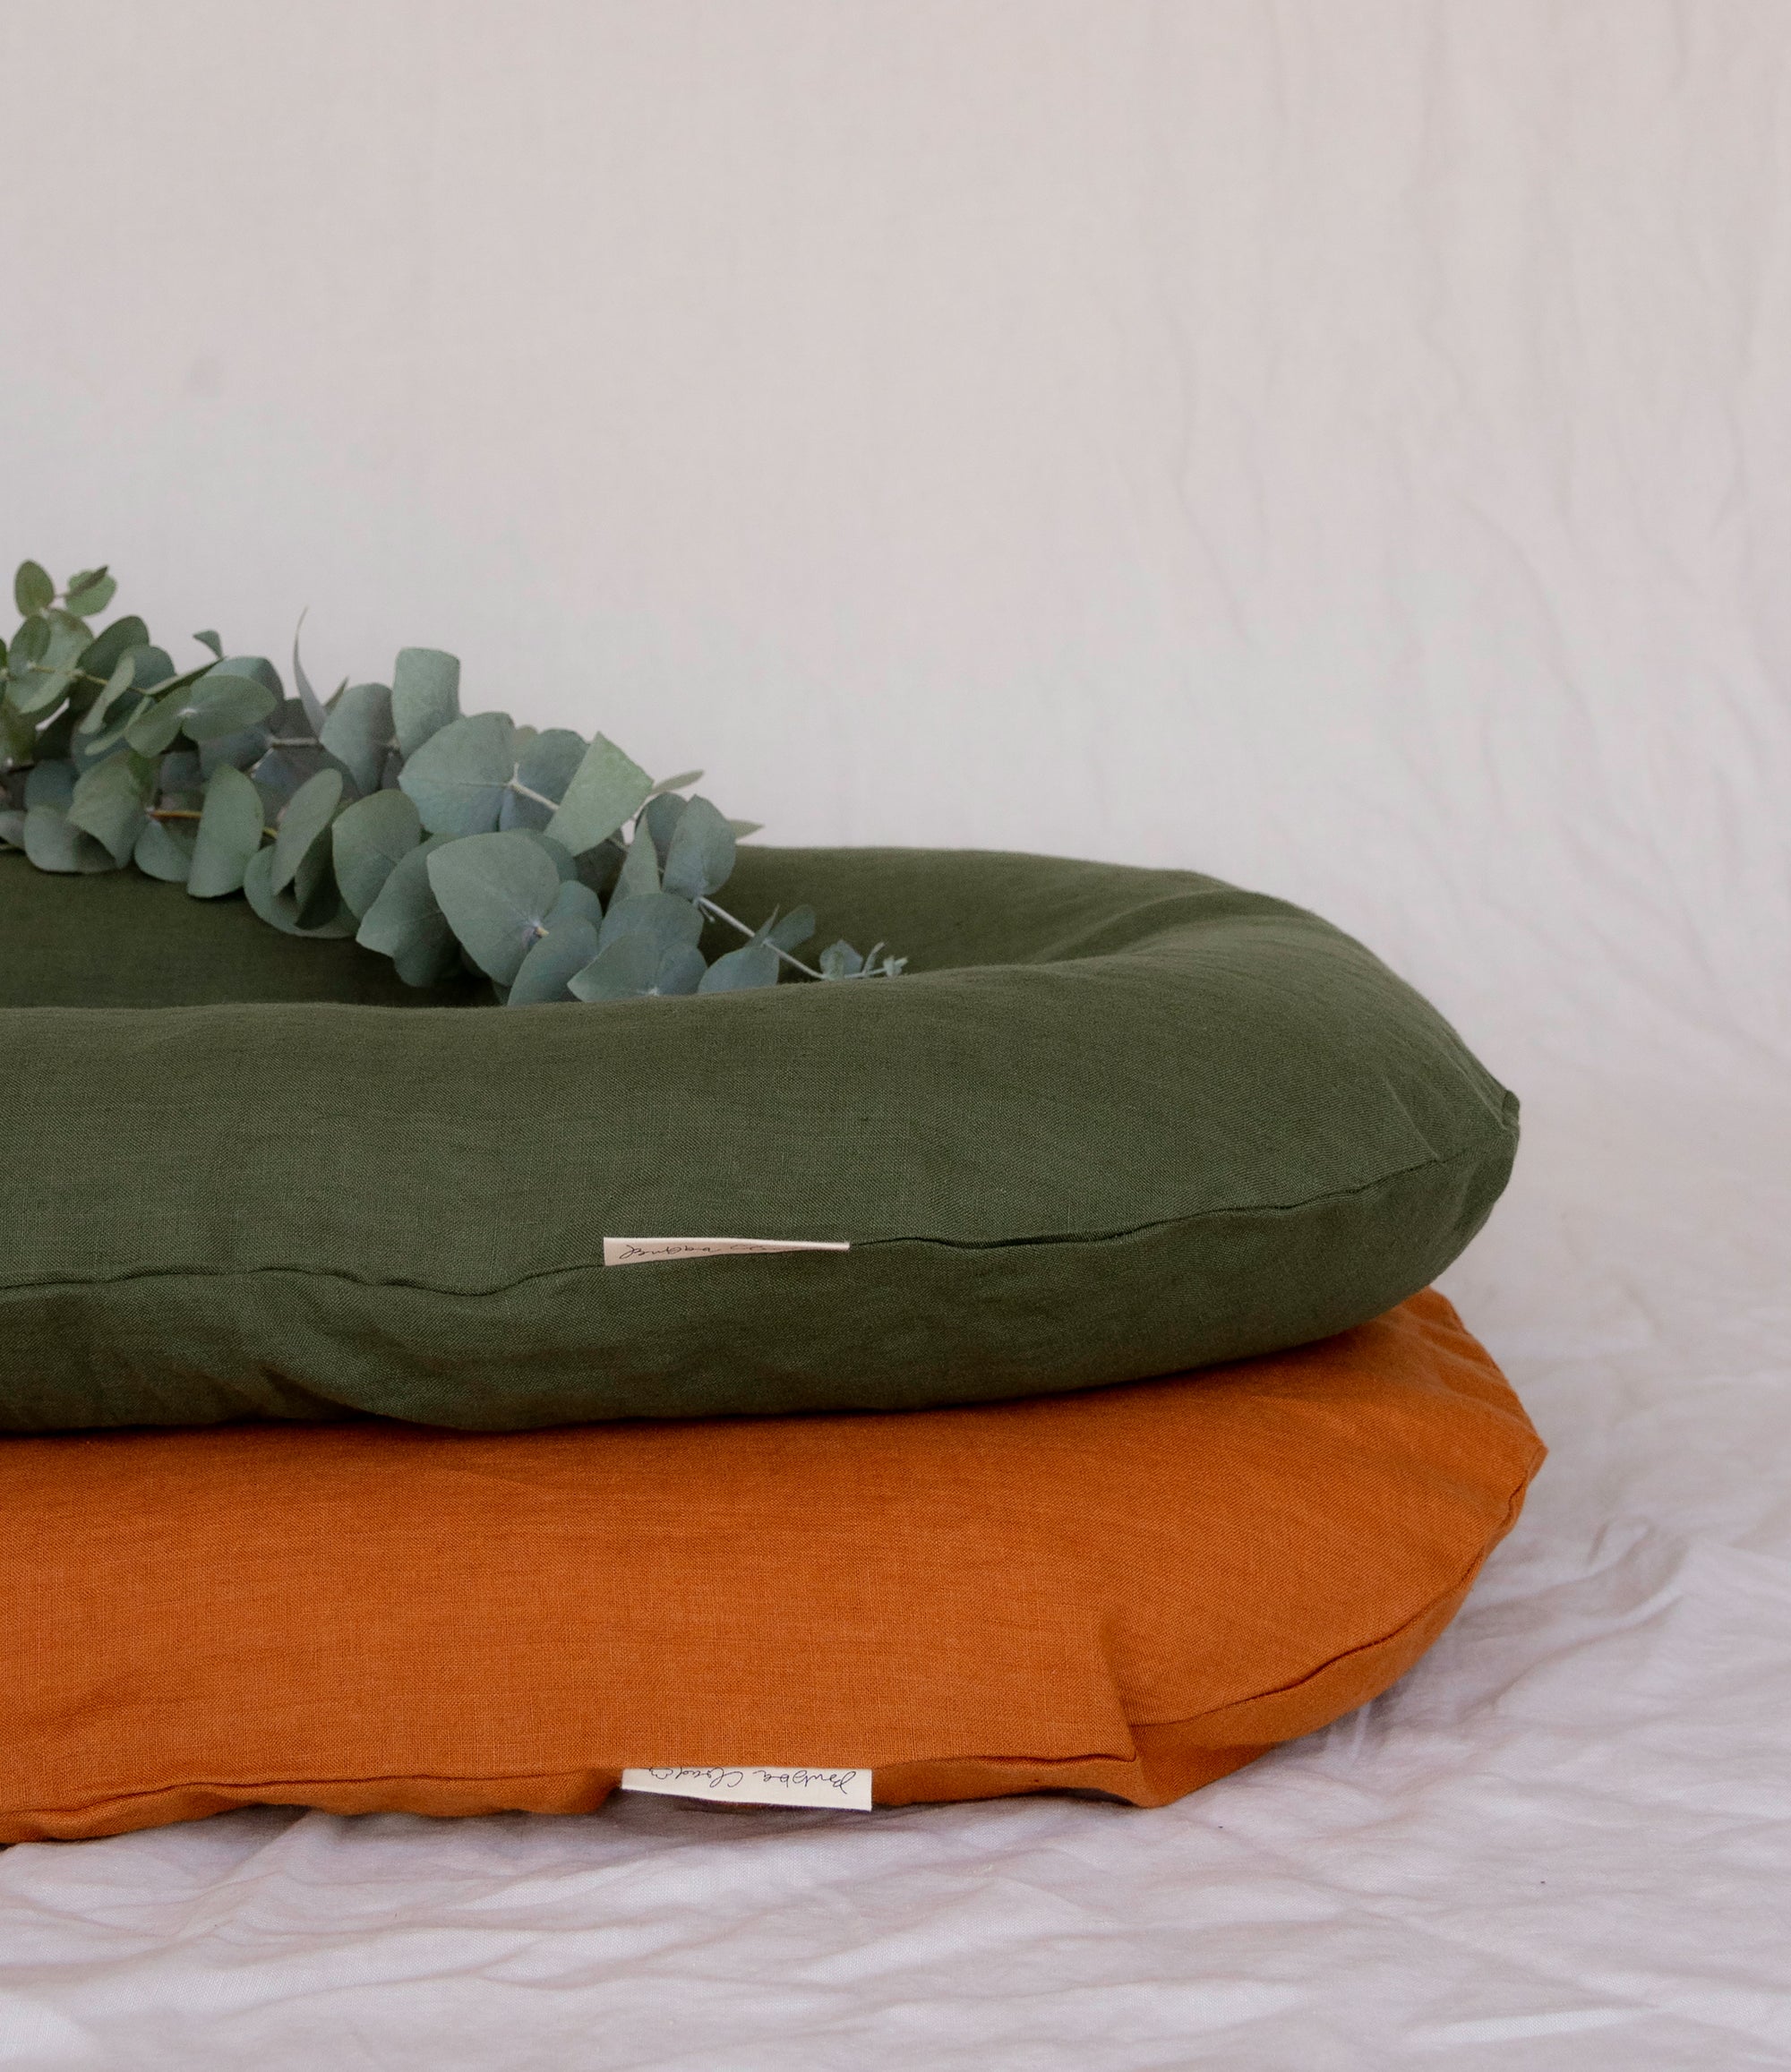 Two Bubba Clouds Are Pictured Against A White Sheet. The Orange Earth Bubba Cloud Linen Lounger Is On The Bottom And The Forest Green Bubba Cloud Linen Lounger Is On The Top. On Top Of The Green Bubba Cloud Lounger Is Eucalyptus. 